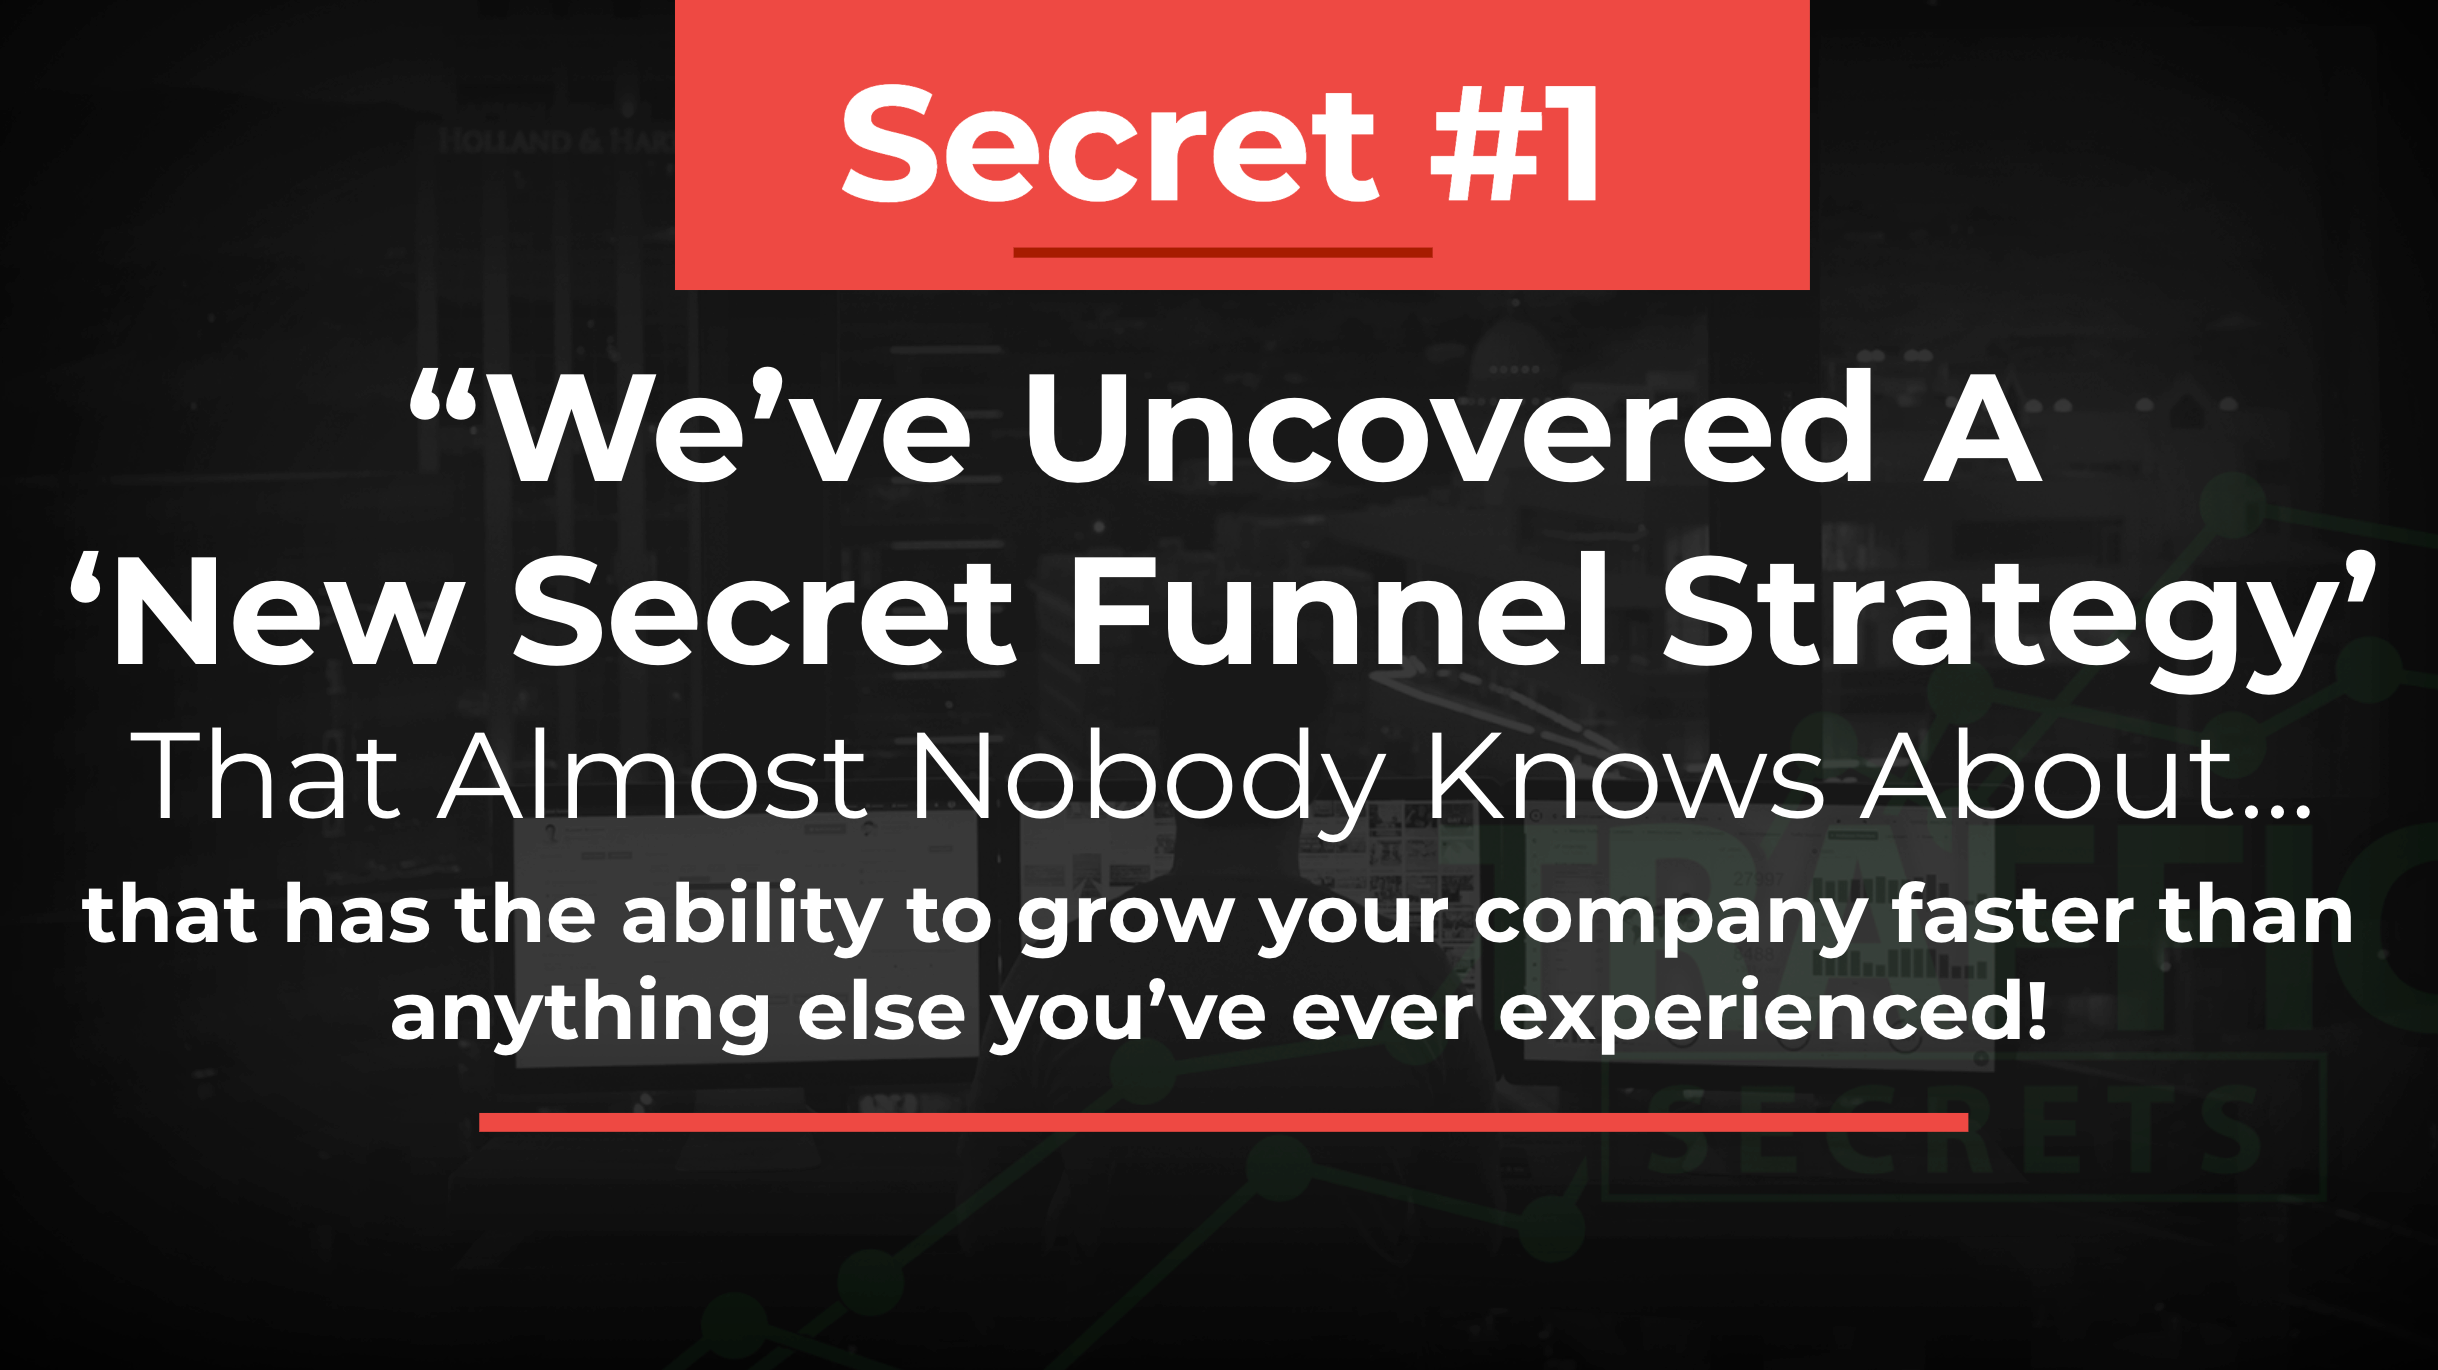 Secret #1 We've uncovered a new secret funnel strategy that almost nobody knows about... that has the ability to grow your company faster that anything else you've ever experienced! 